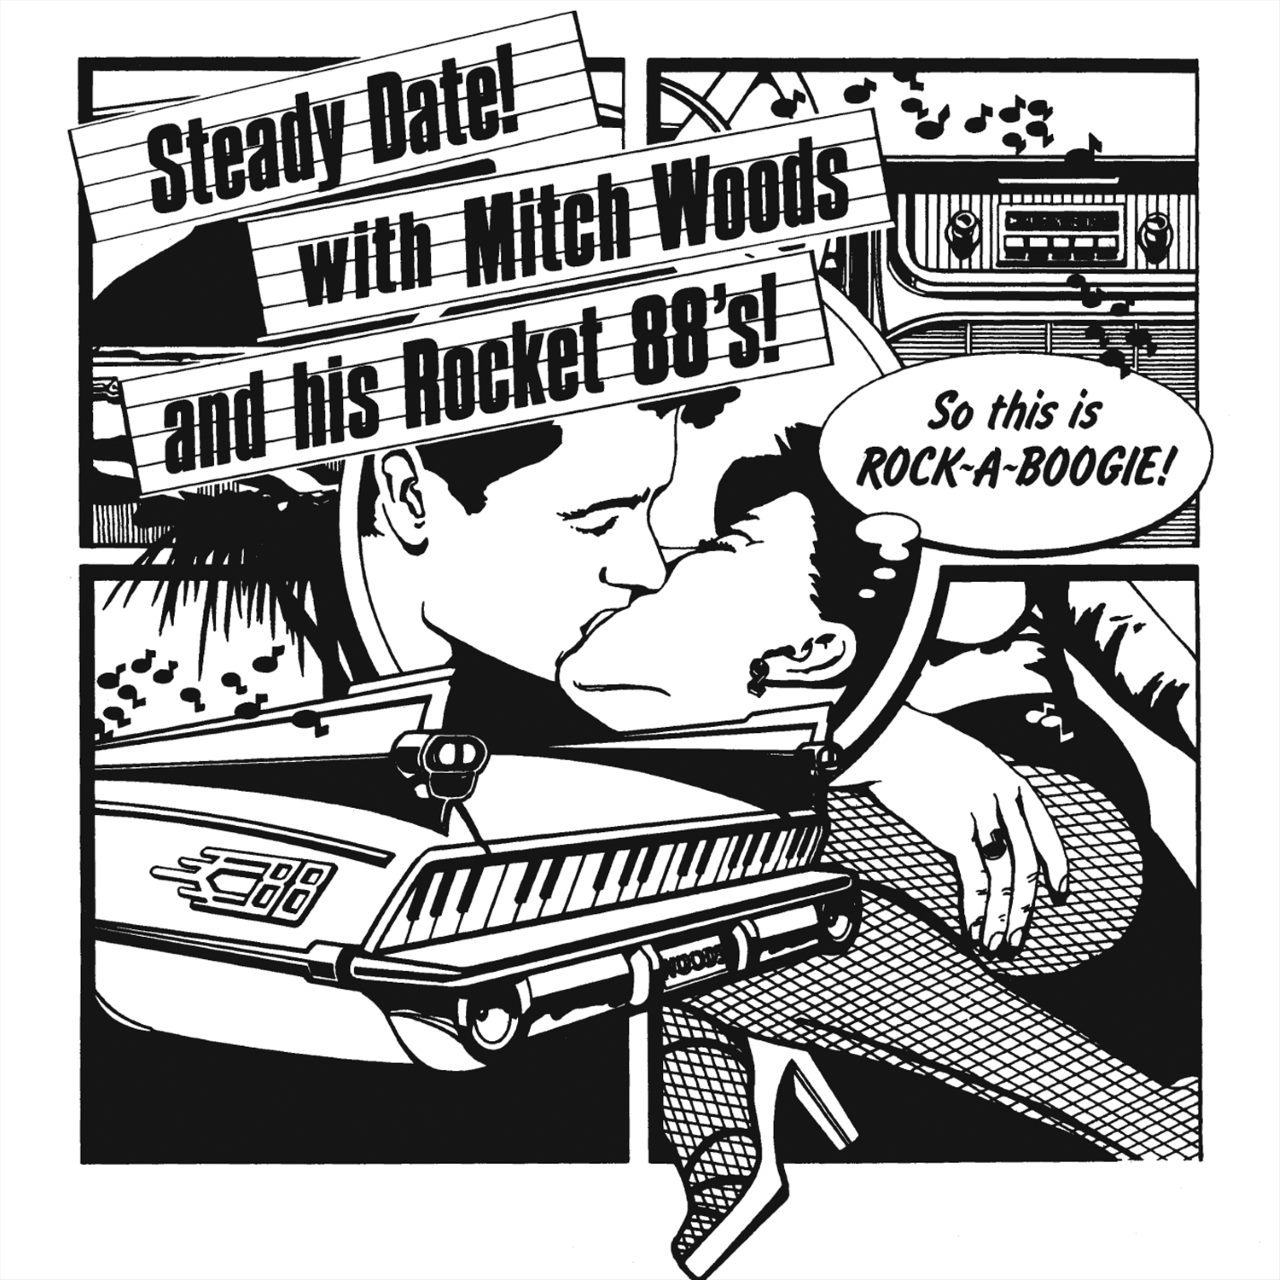 Mitch Woods And His Rocket 88’s – Steady Date cover album